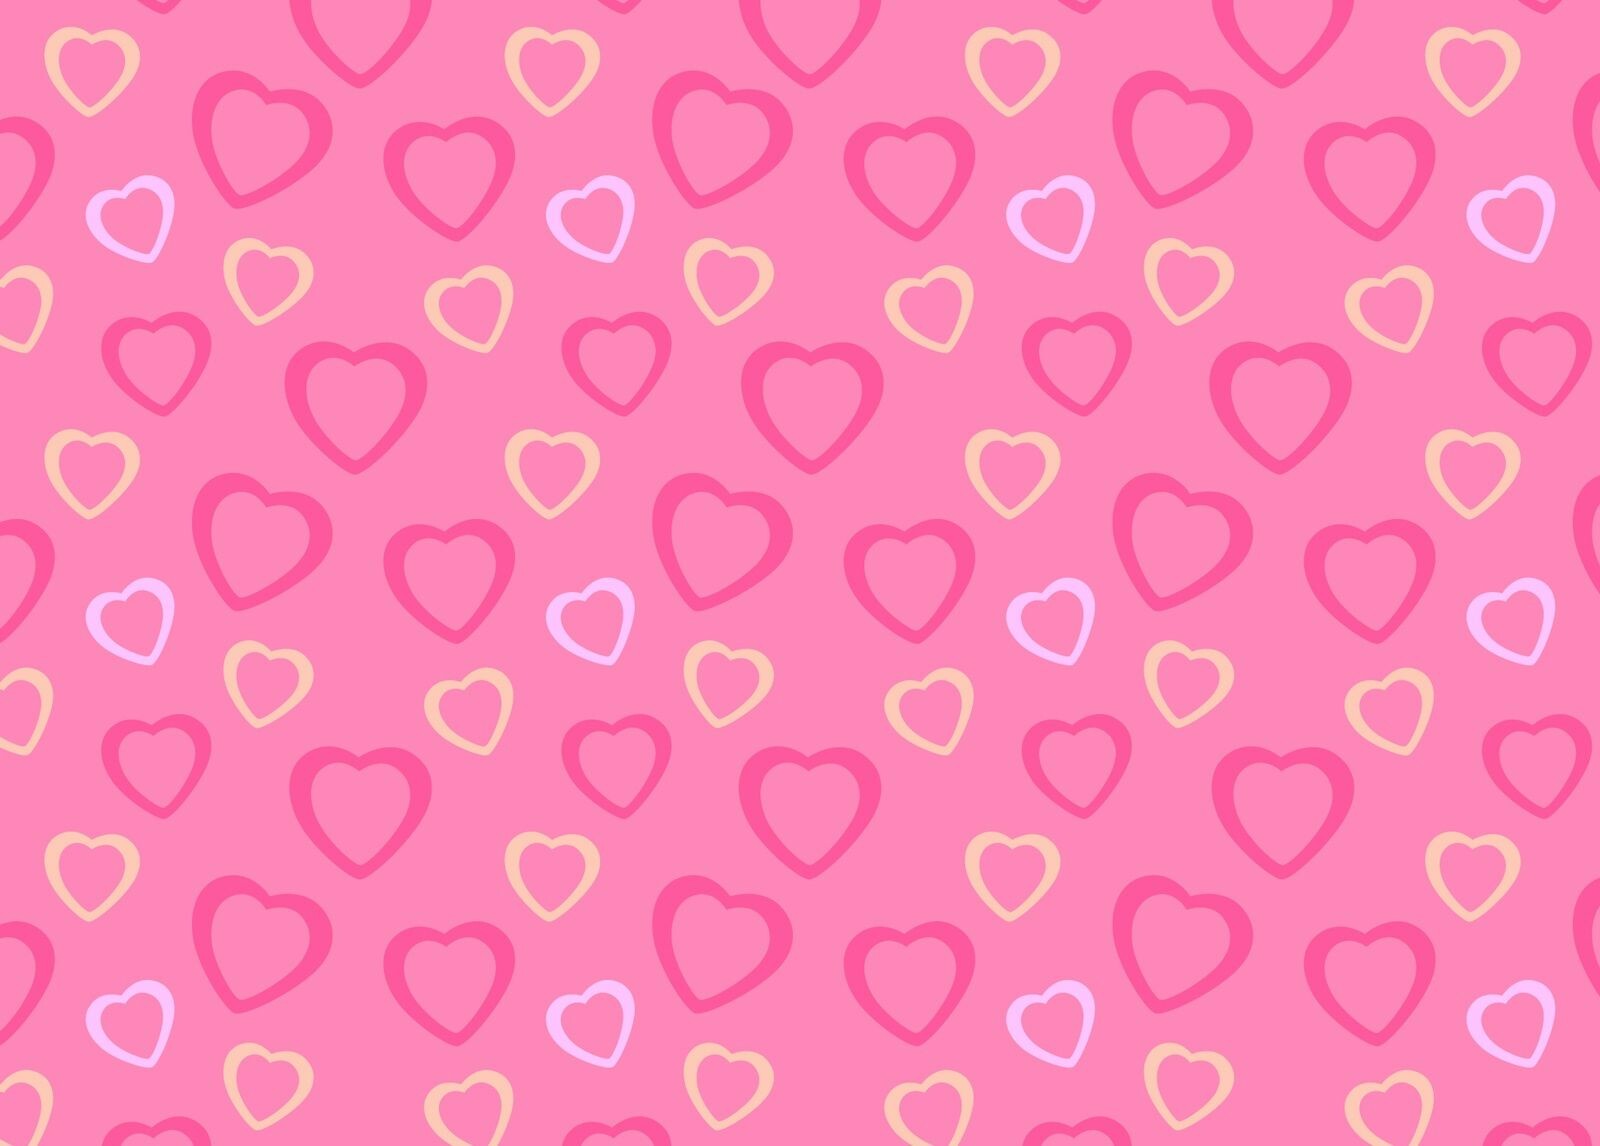 Pink Heart Wallpaper: HD, 4K, 5K for PC and Mobile. Download free image for iPhone, Android